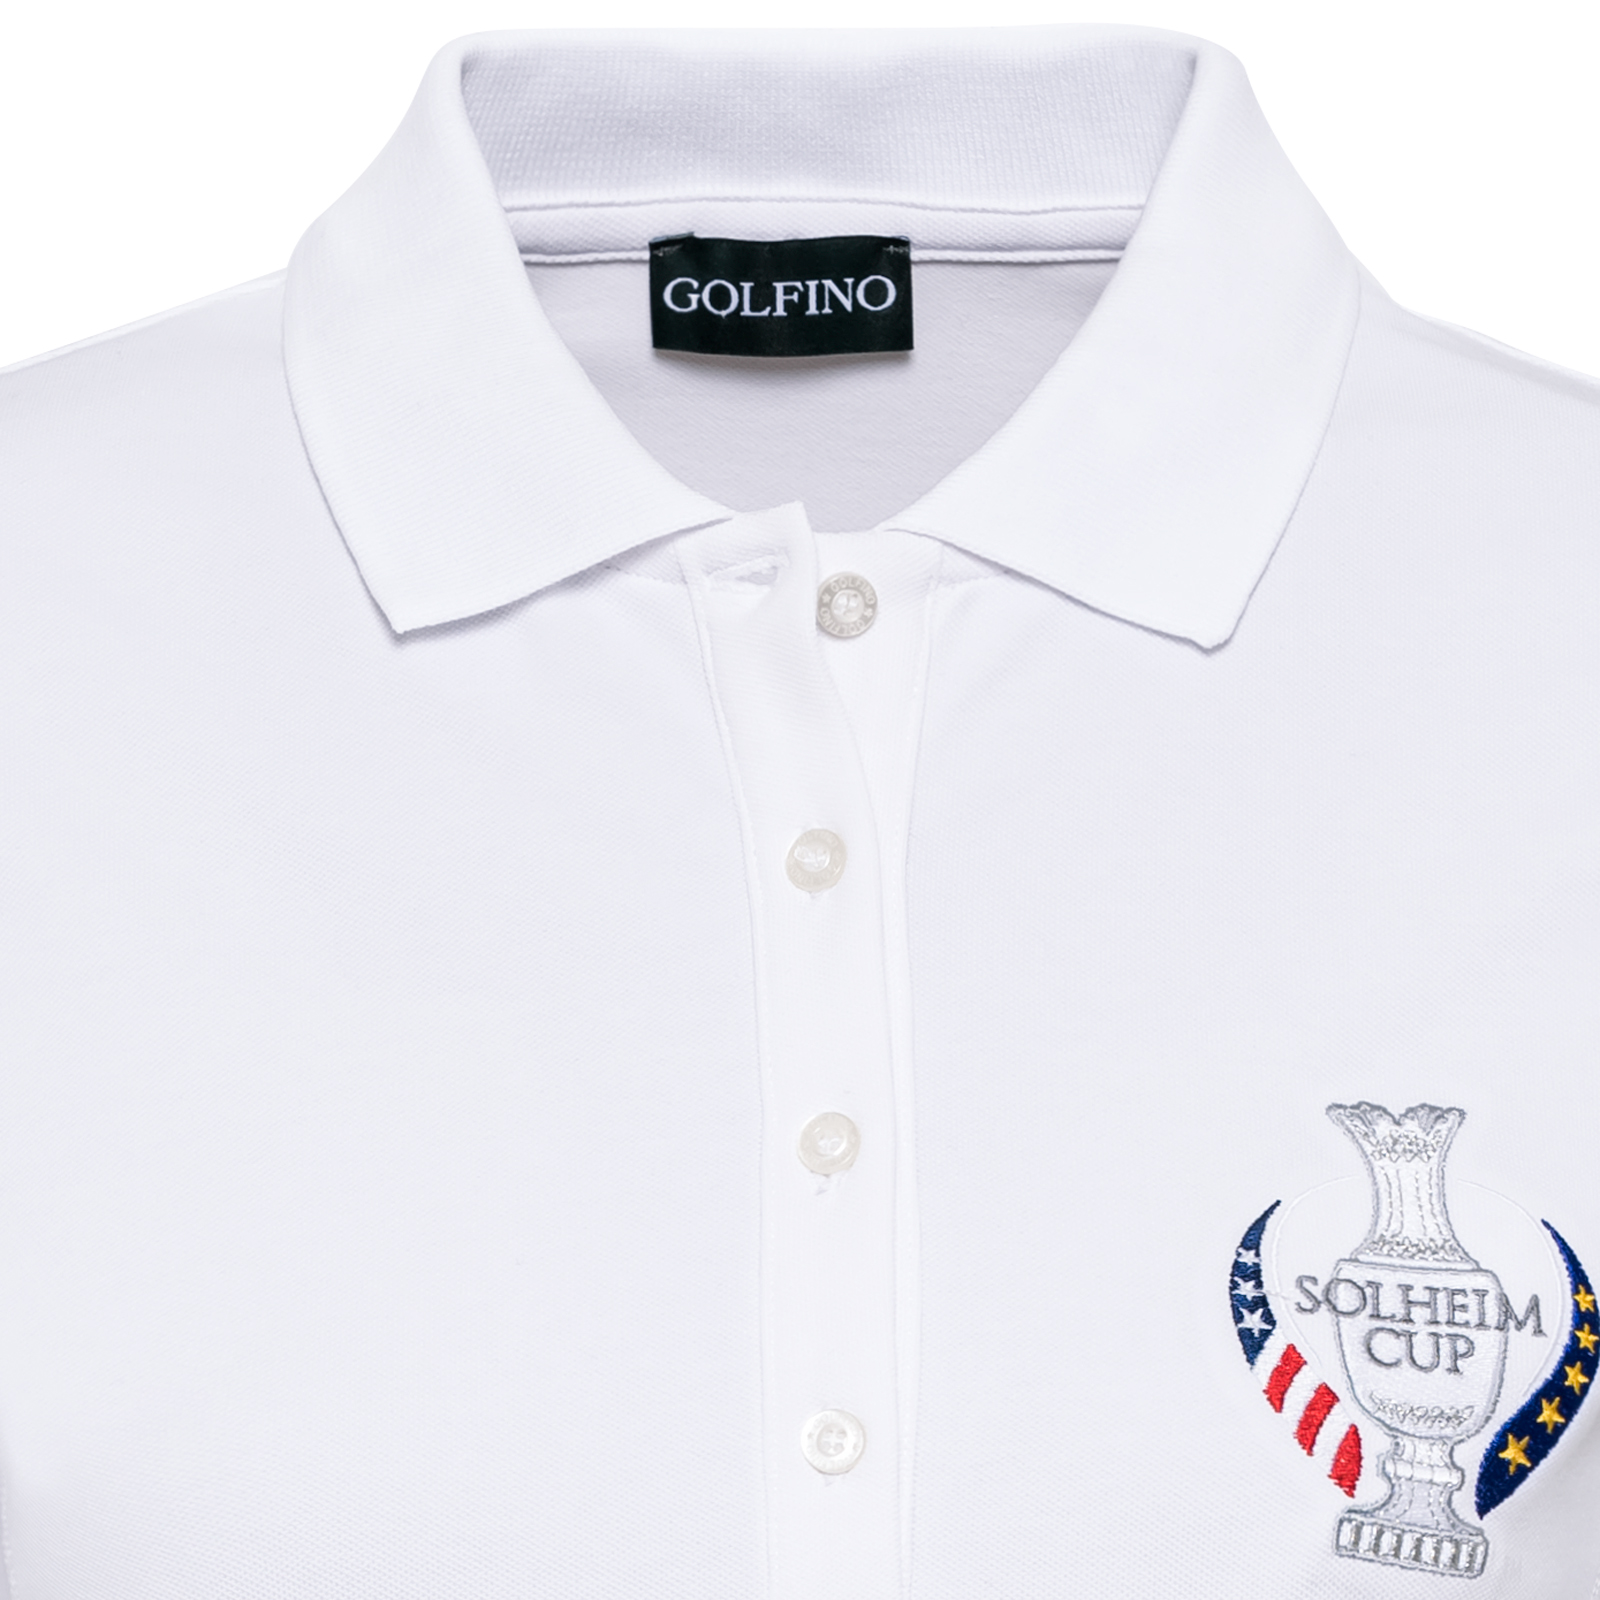 Ladies' polo shirt with ultraviolet protection in Solheim Cup design